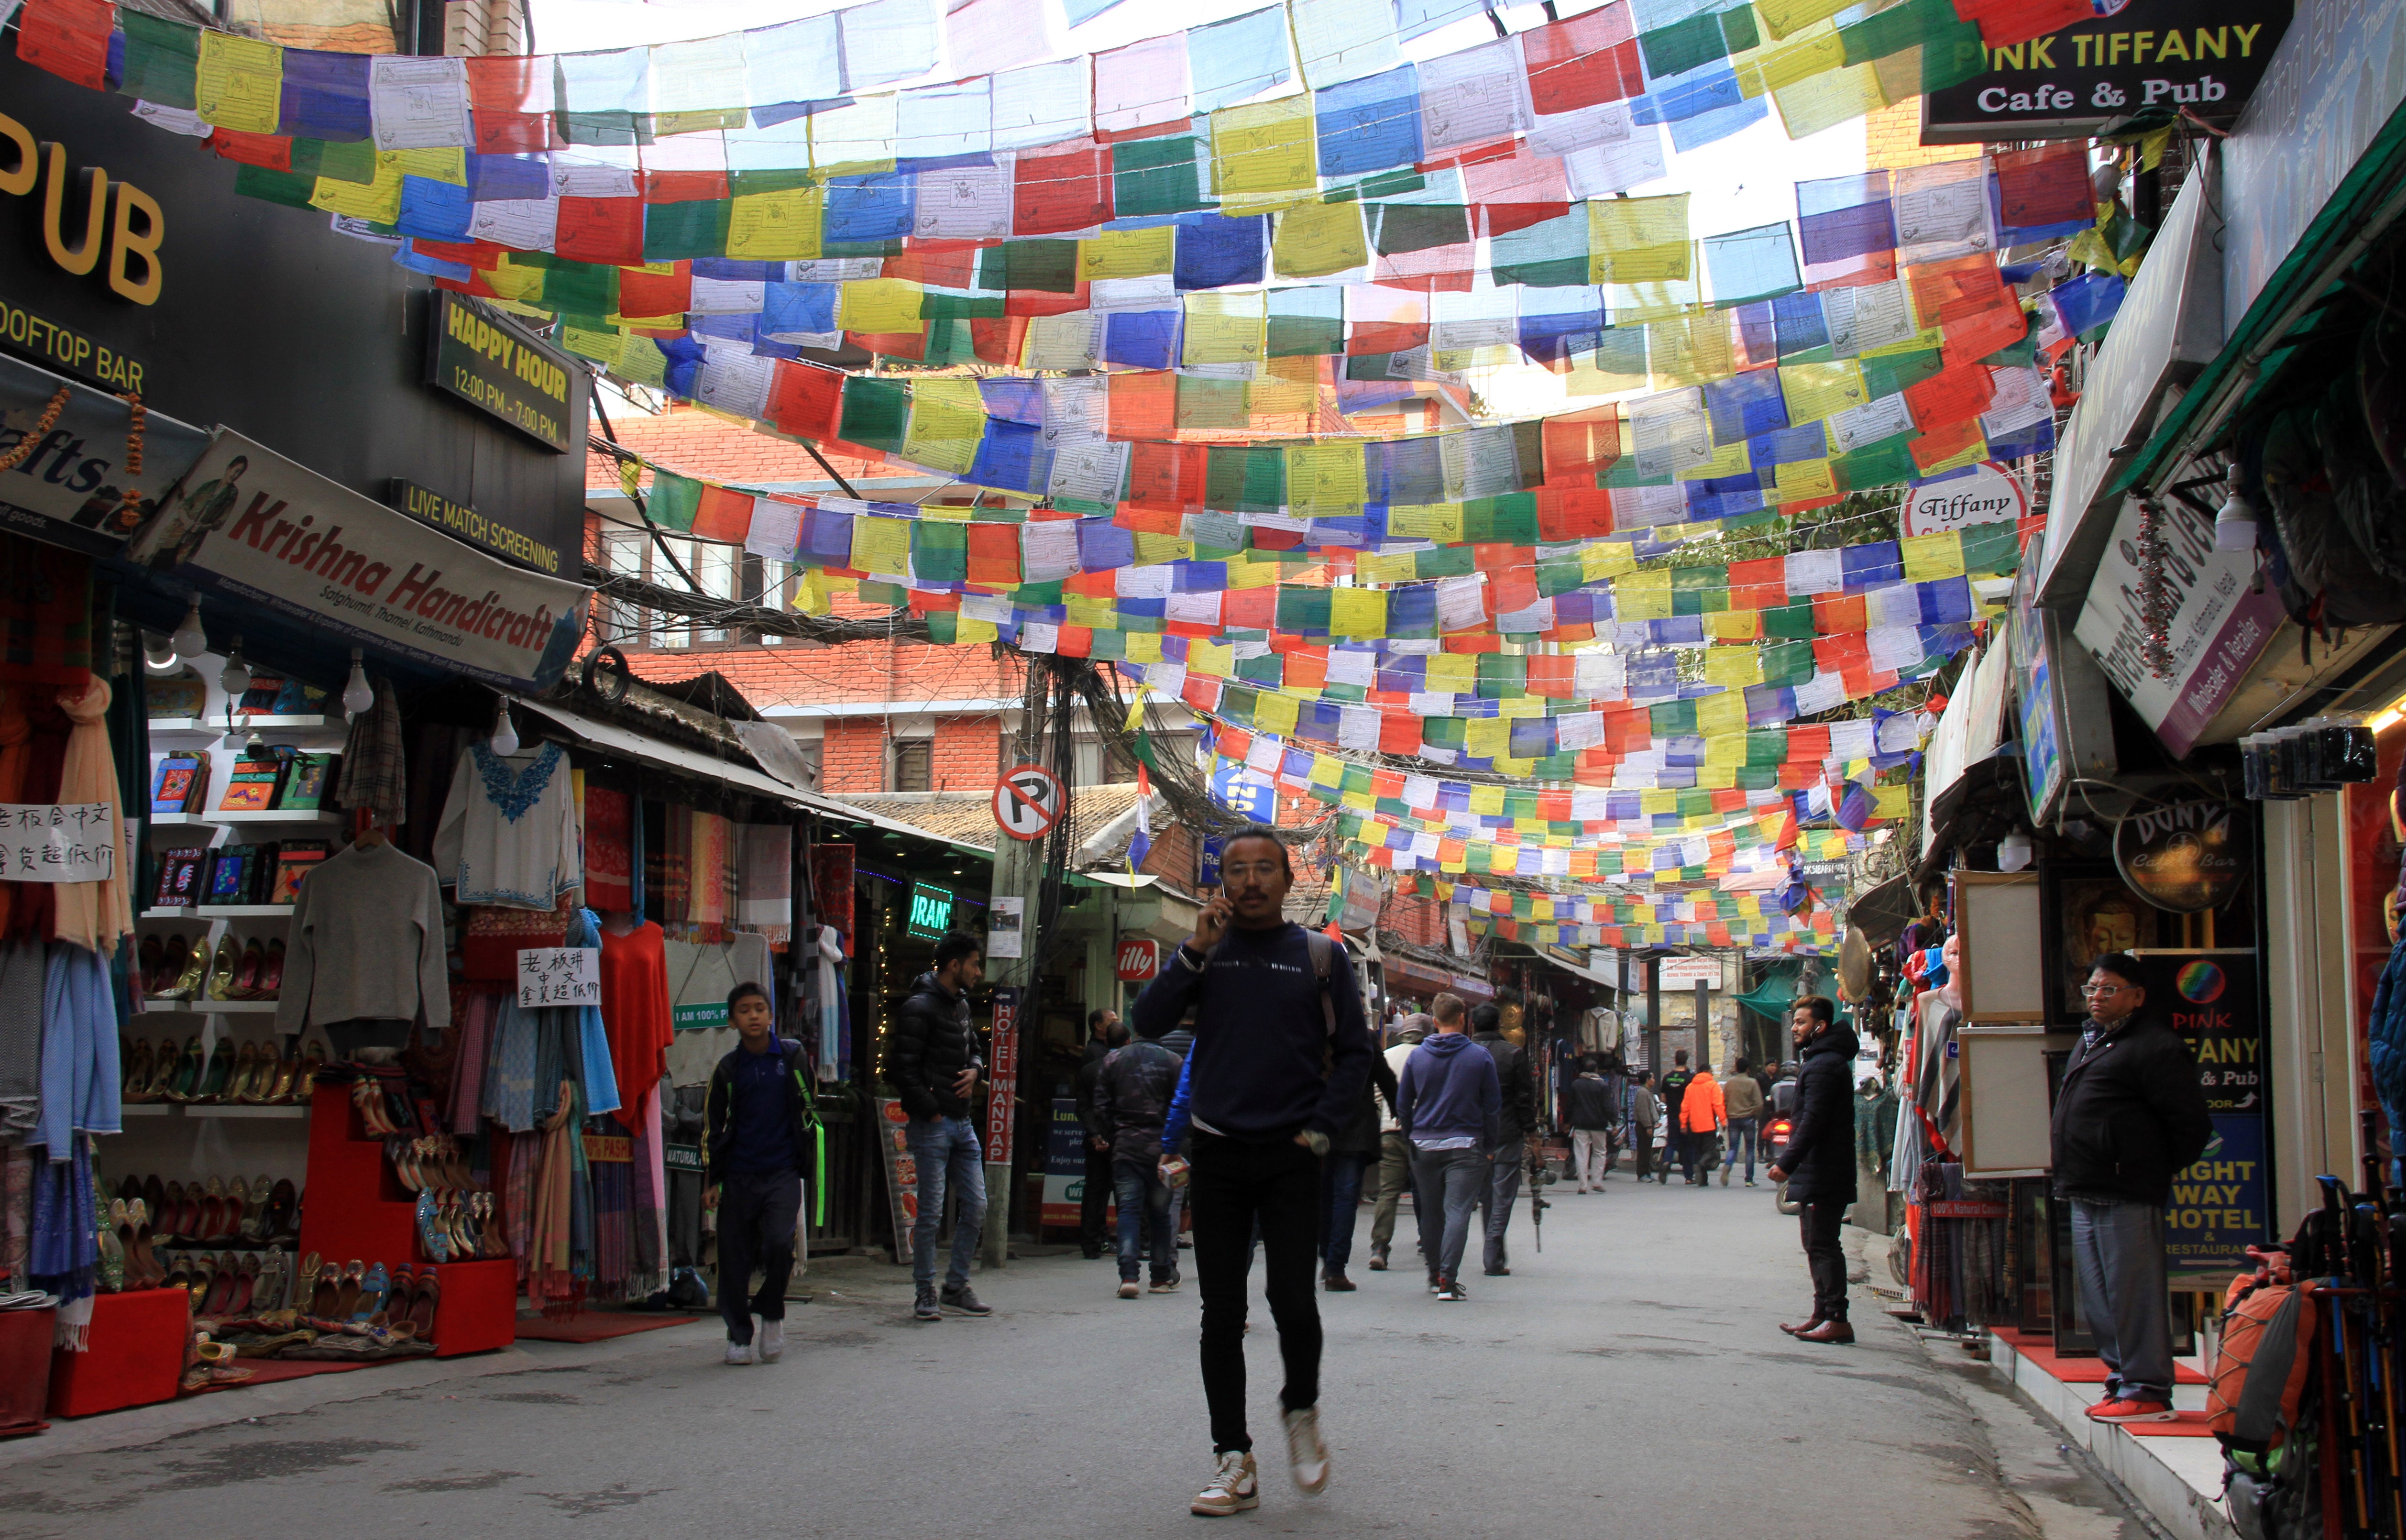 Thamel, Kathmandu's thriving tourist area, is also home to MoNA, the Museum of Nepali Art